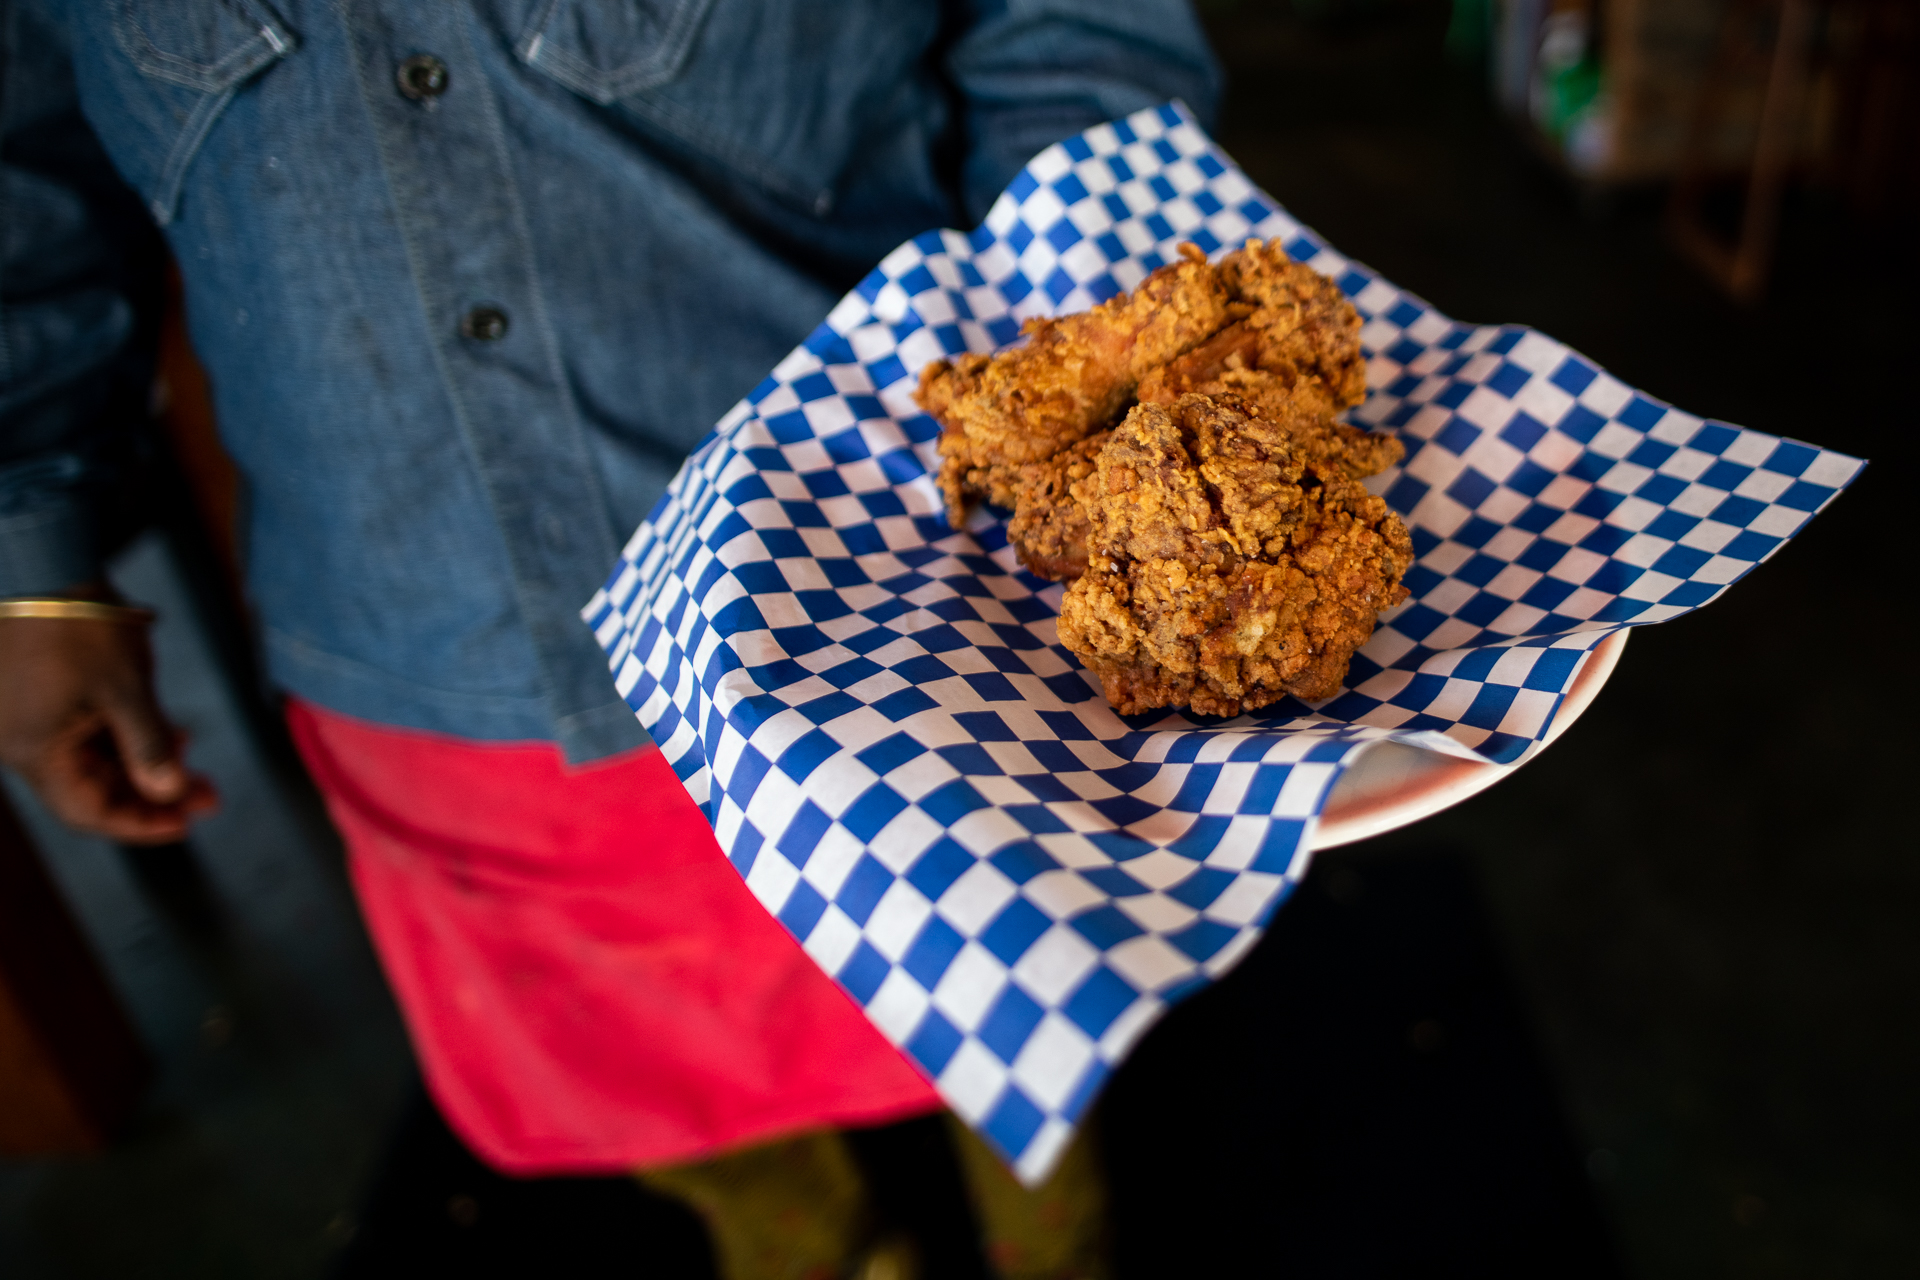 A piece of fried chicken on blue-and-white checkered paper.